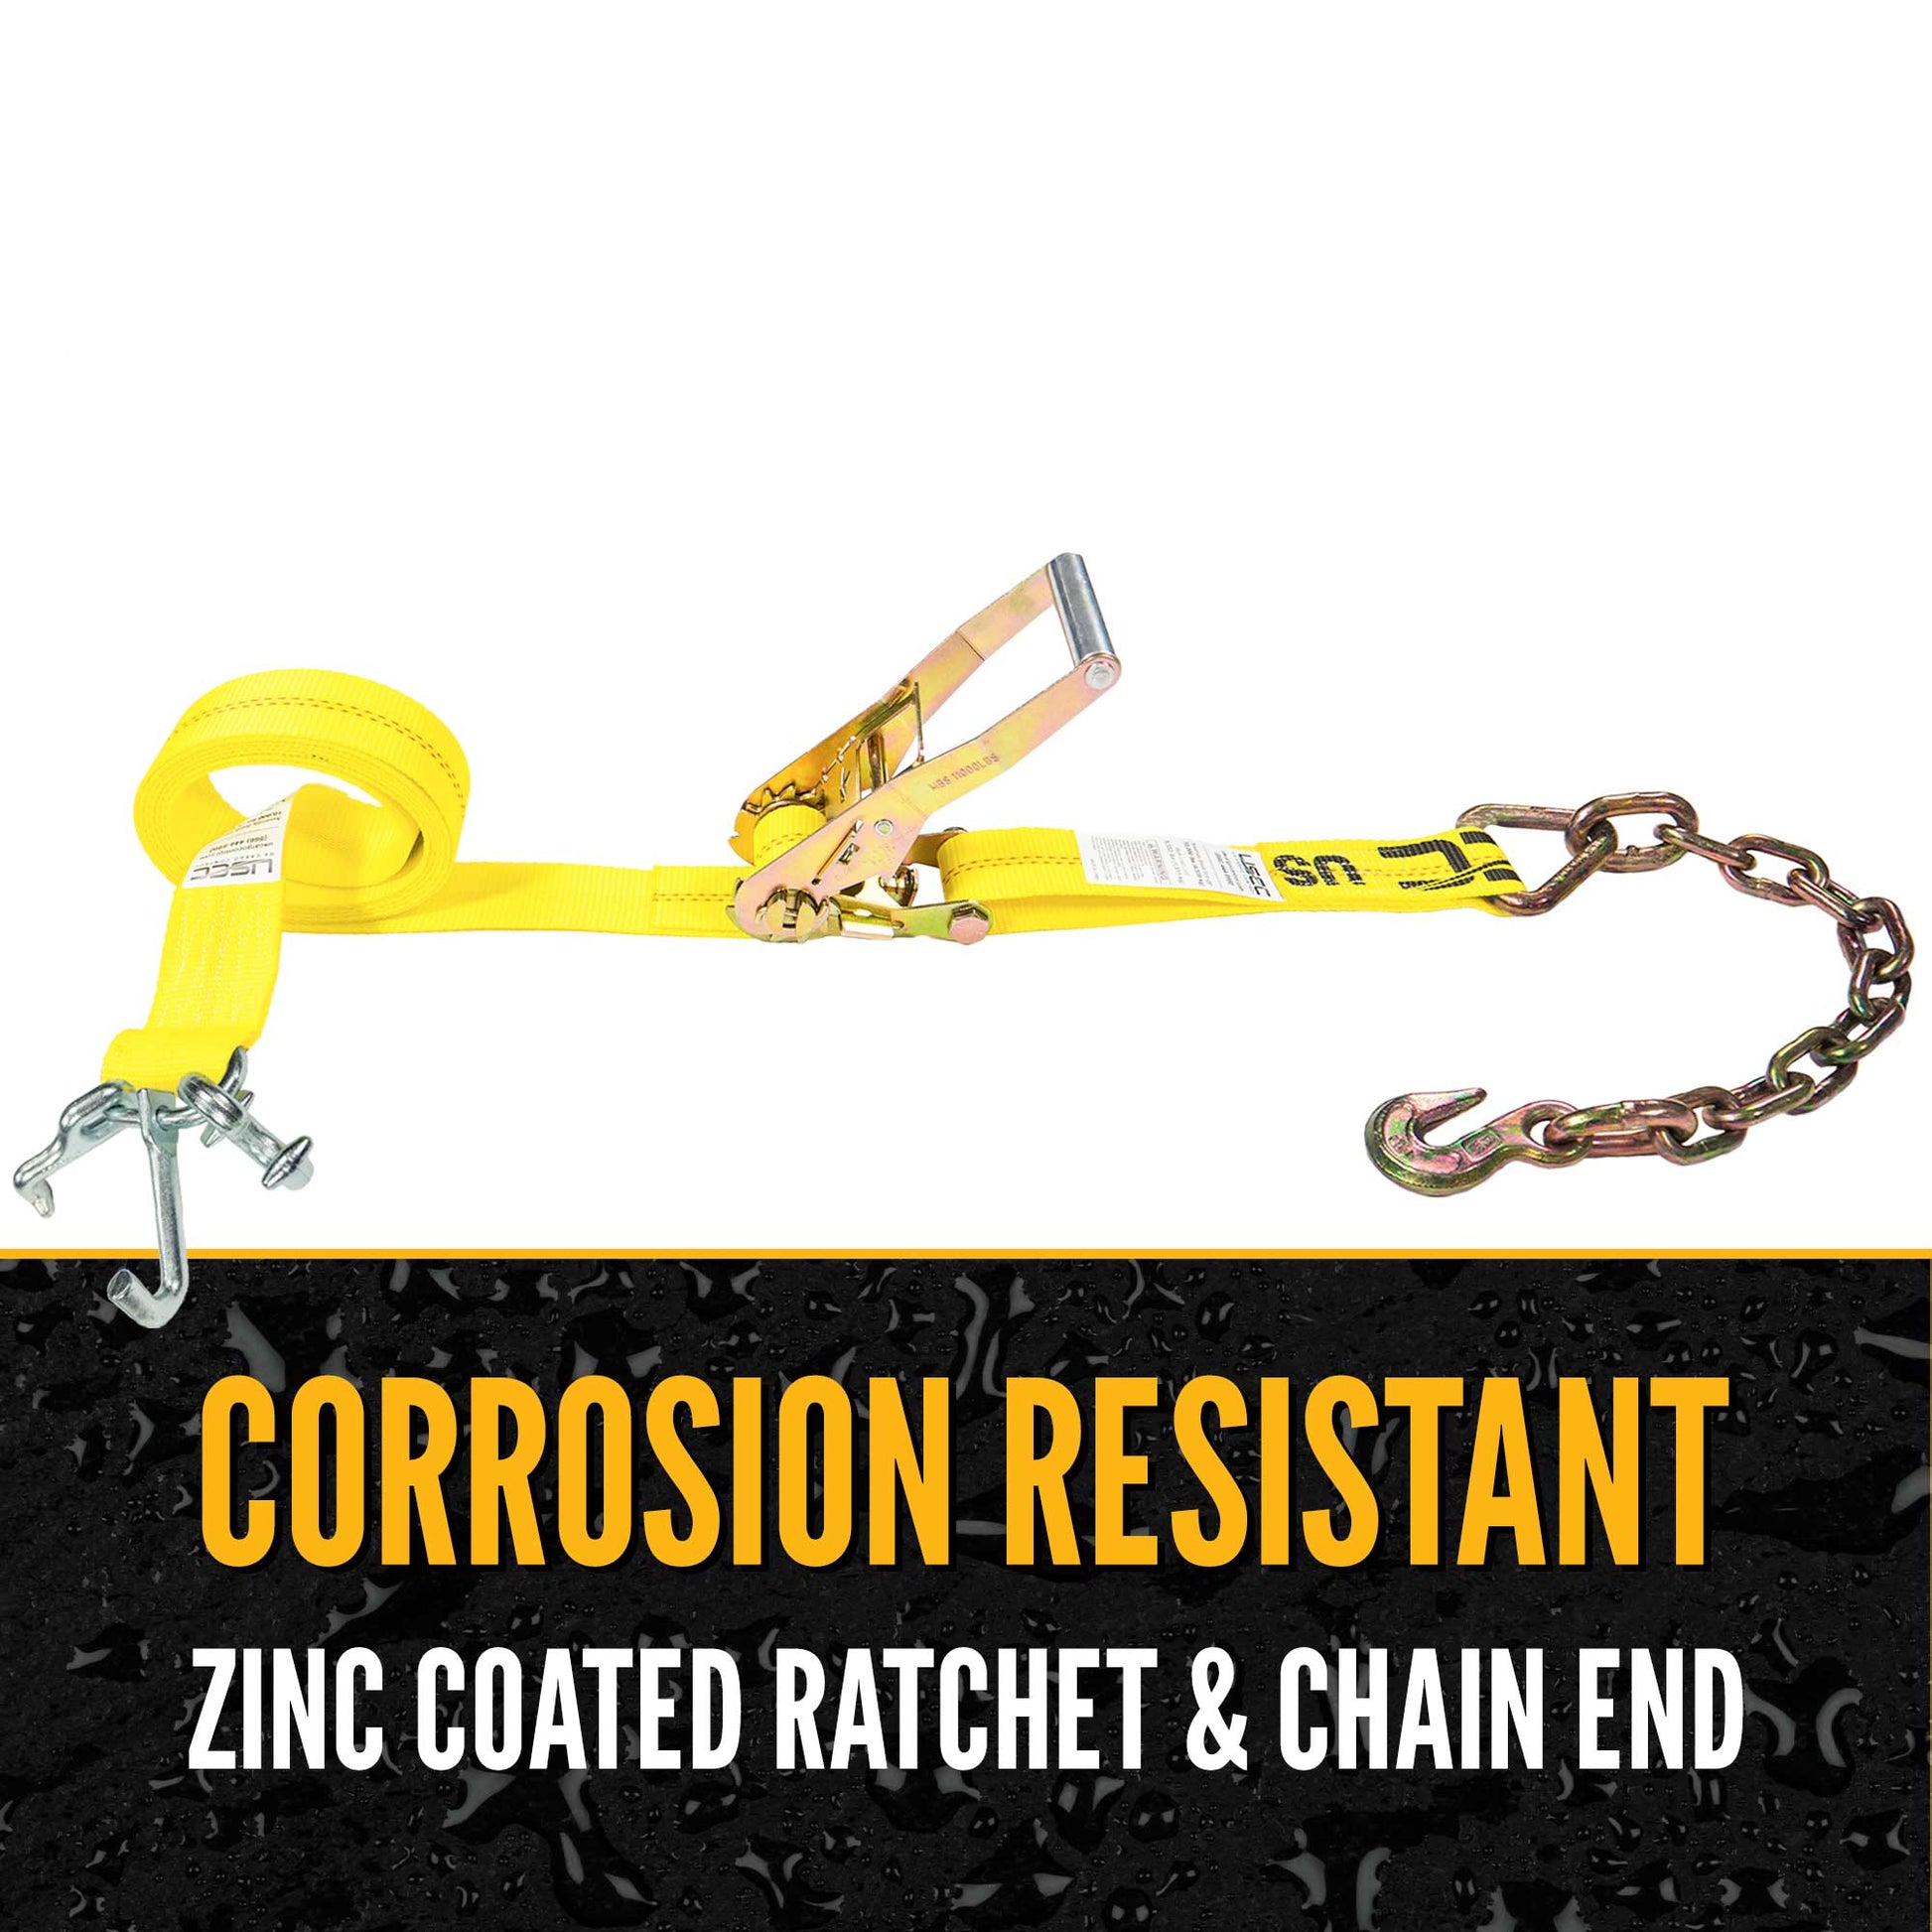 15' tow truck strap -  zinc coated hardware resists corrosion